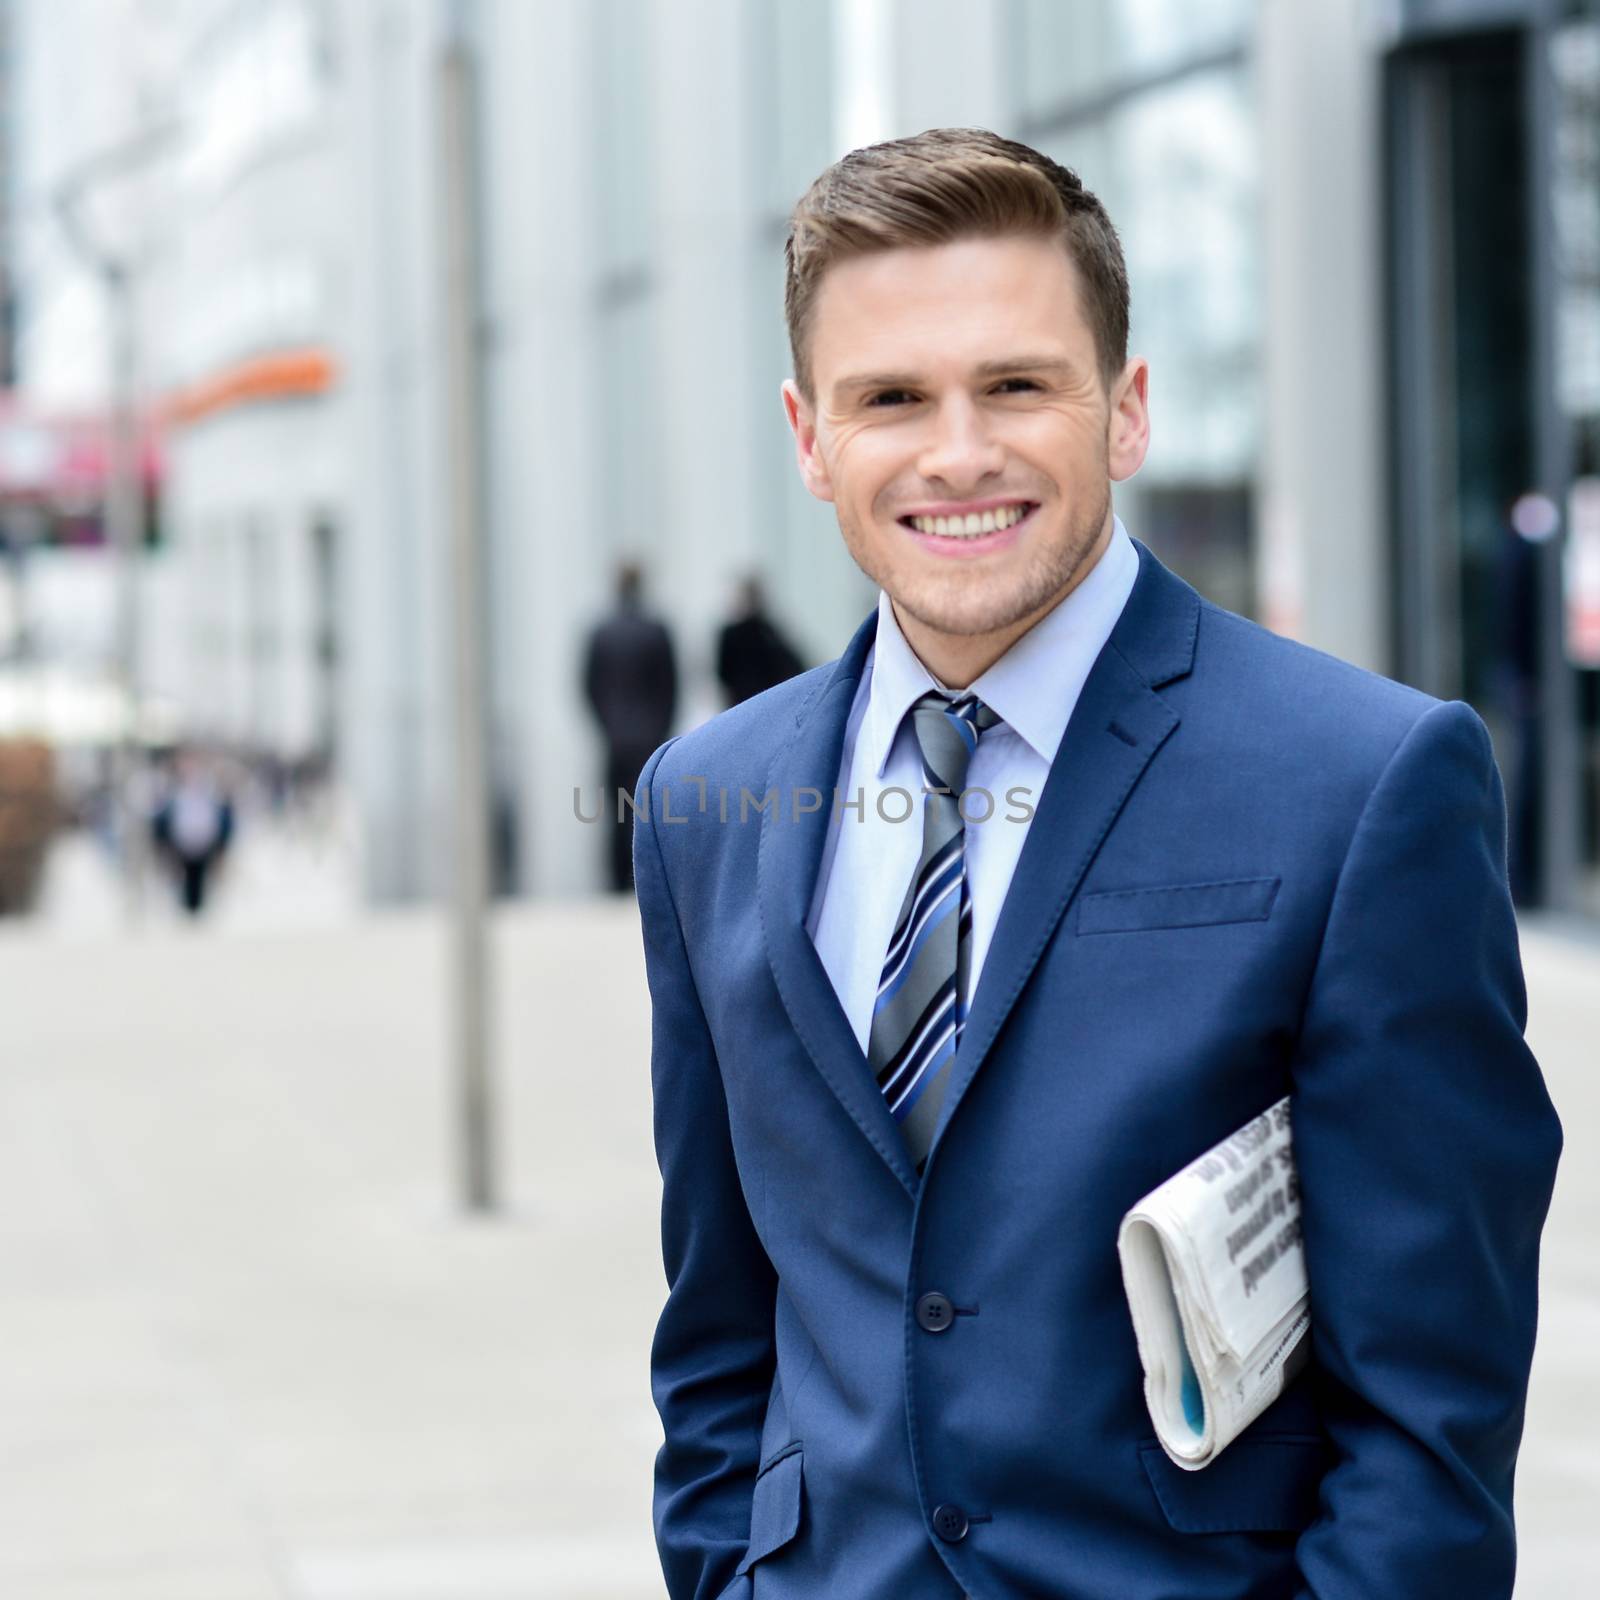 Smiling satisfied businessman holding news paper at outdoor